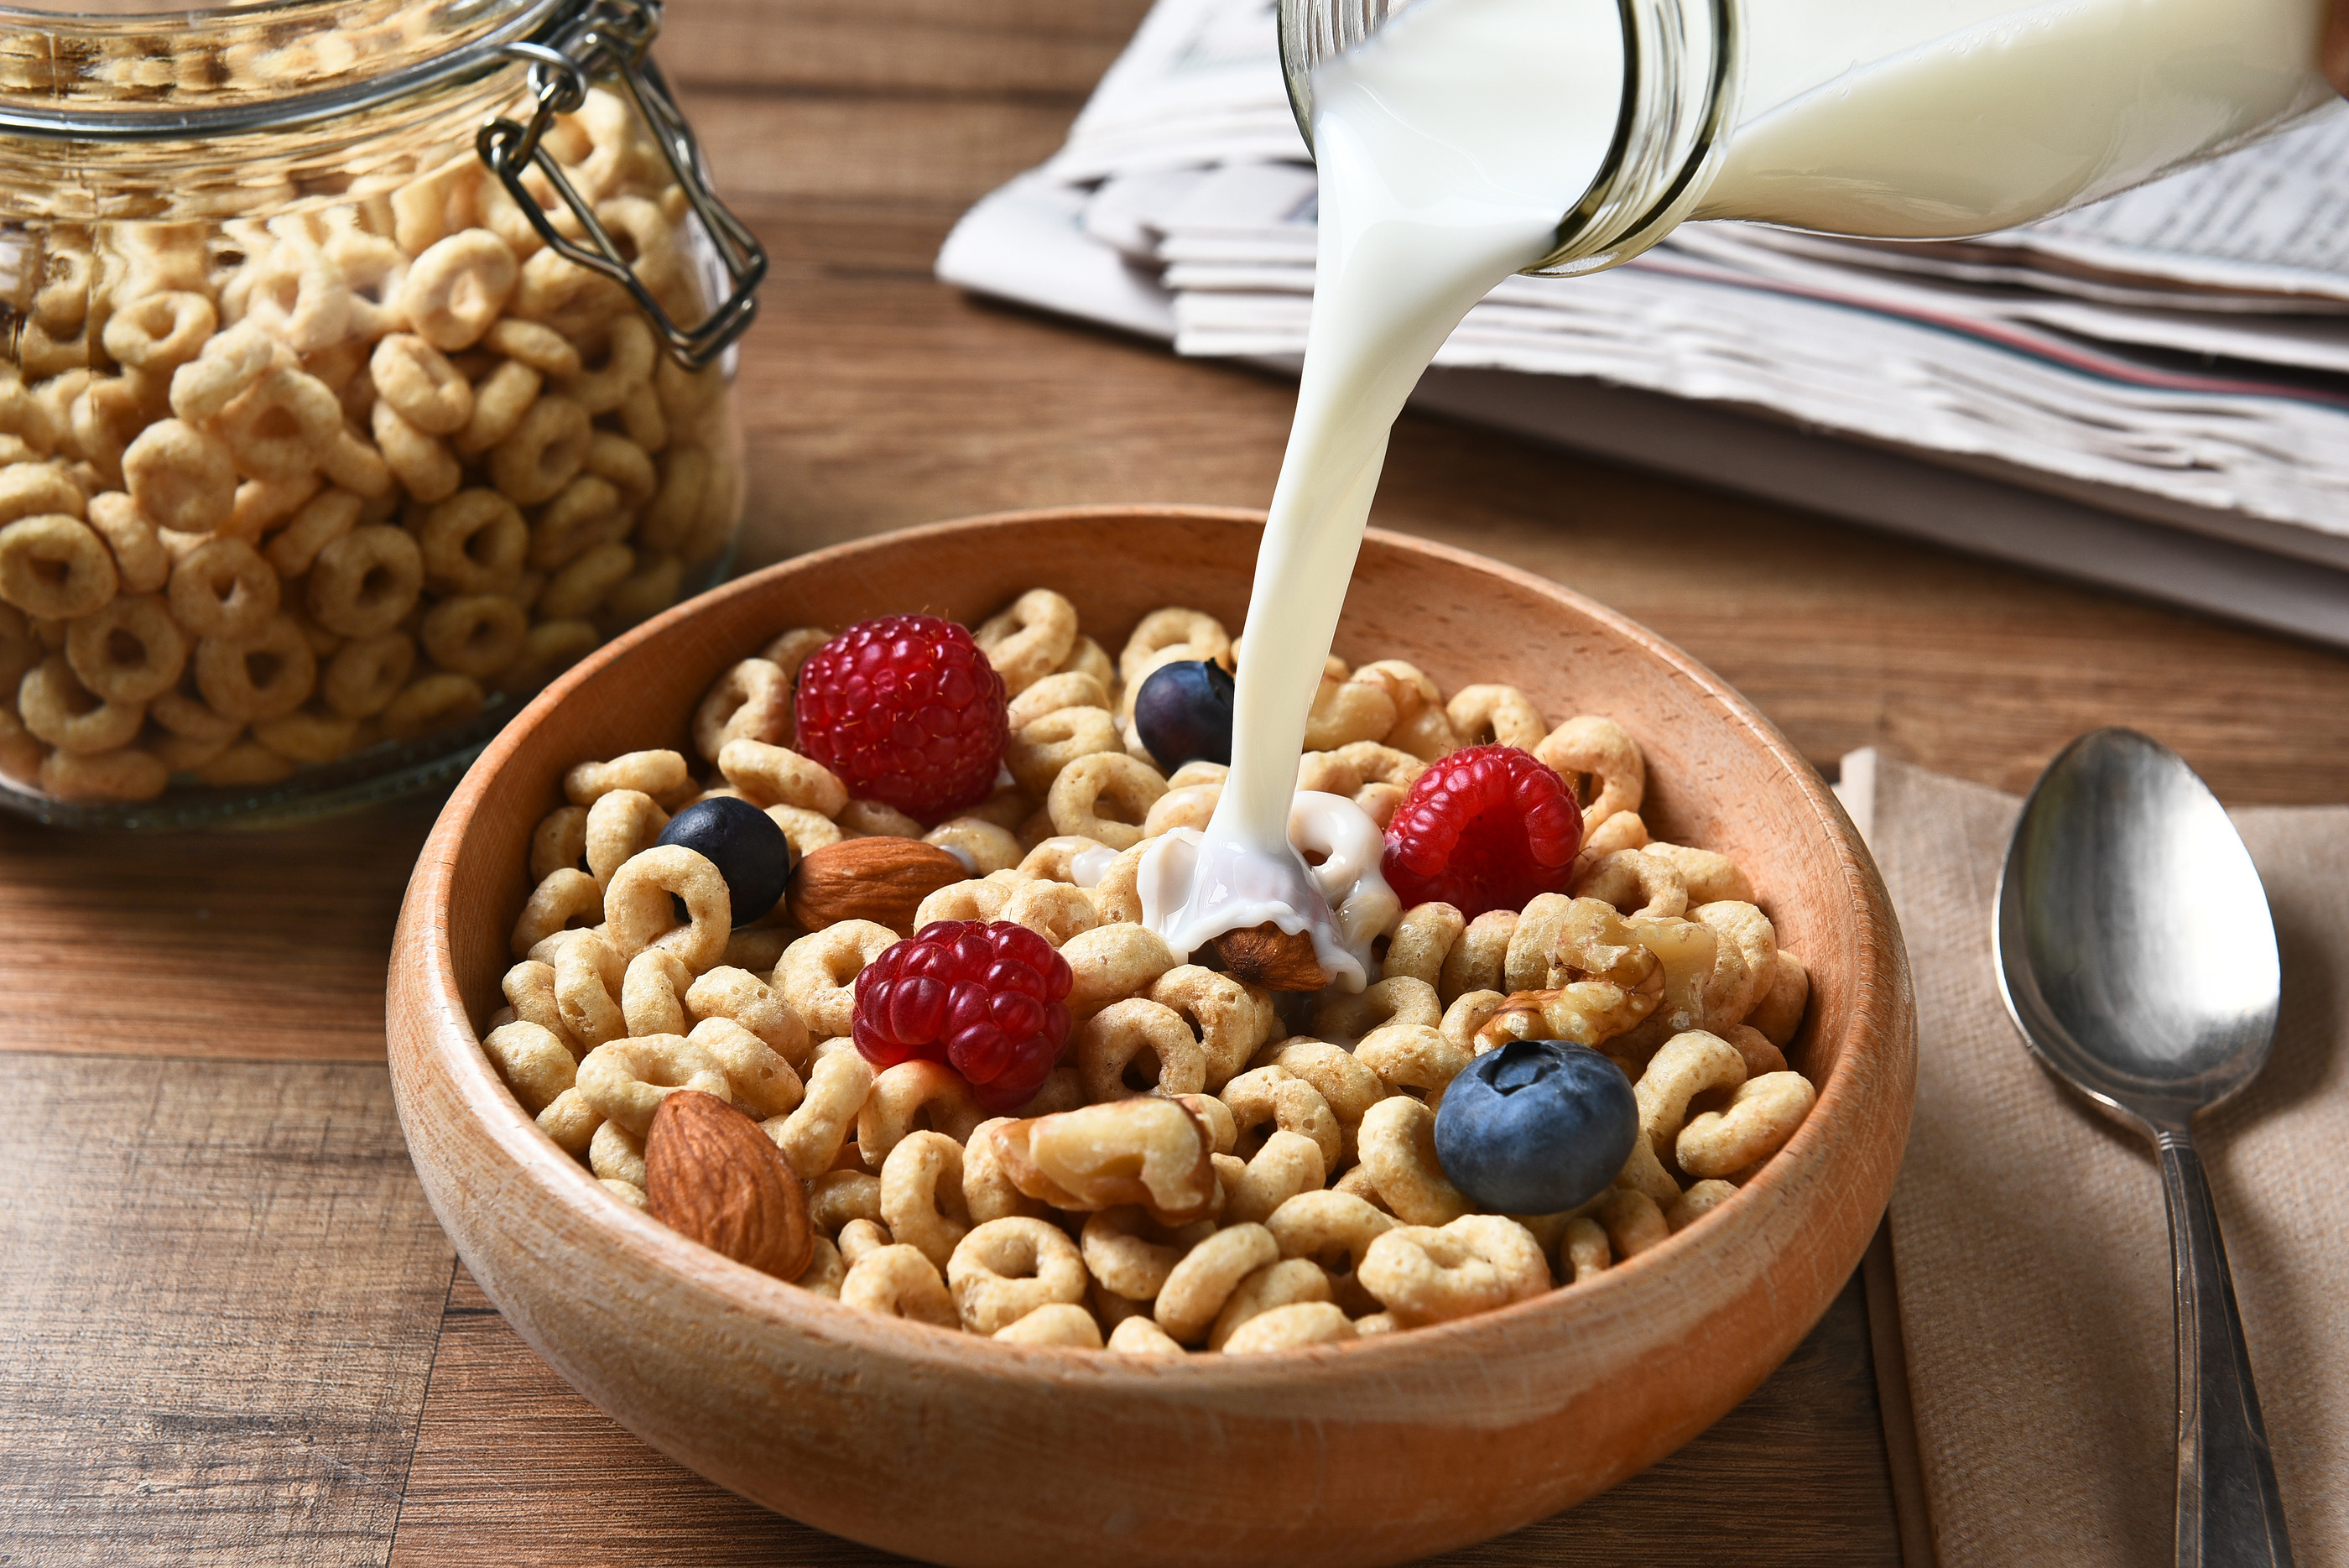 Healthy Breakfast Cereals
 The Fascinating Ways in Which Breakfast Cereals are Made